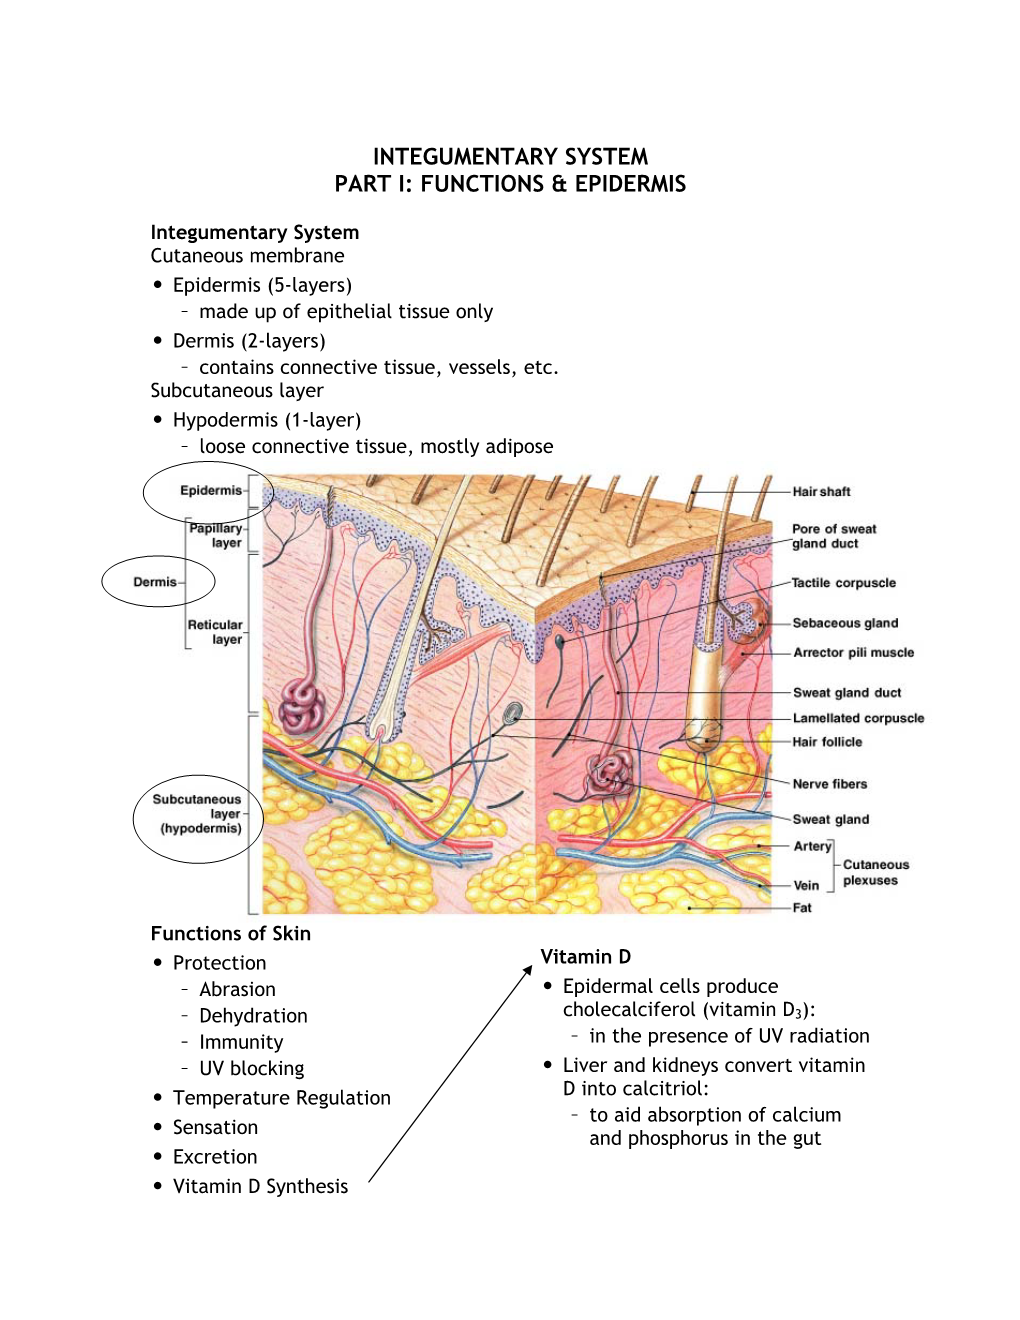 Integumentary System Part I: Functions & Epidermis